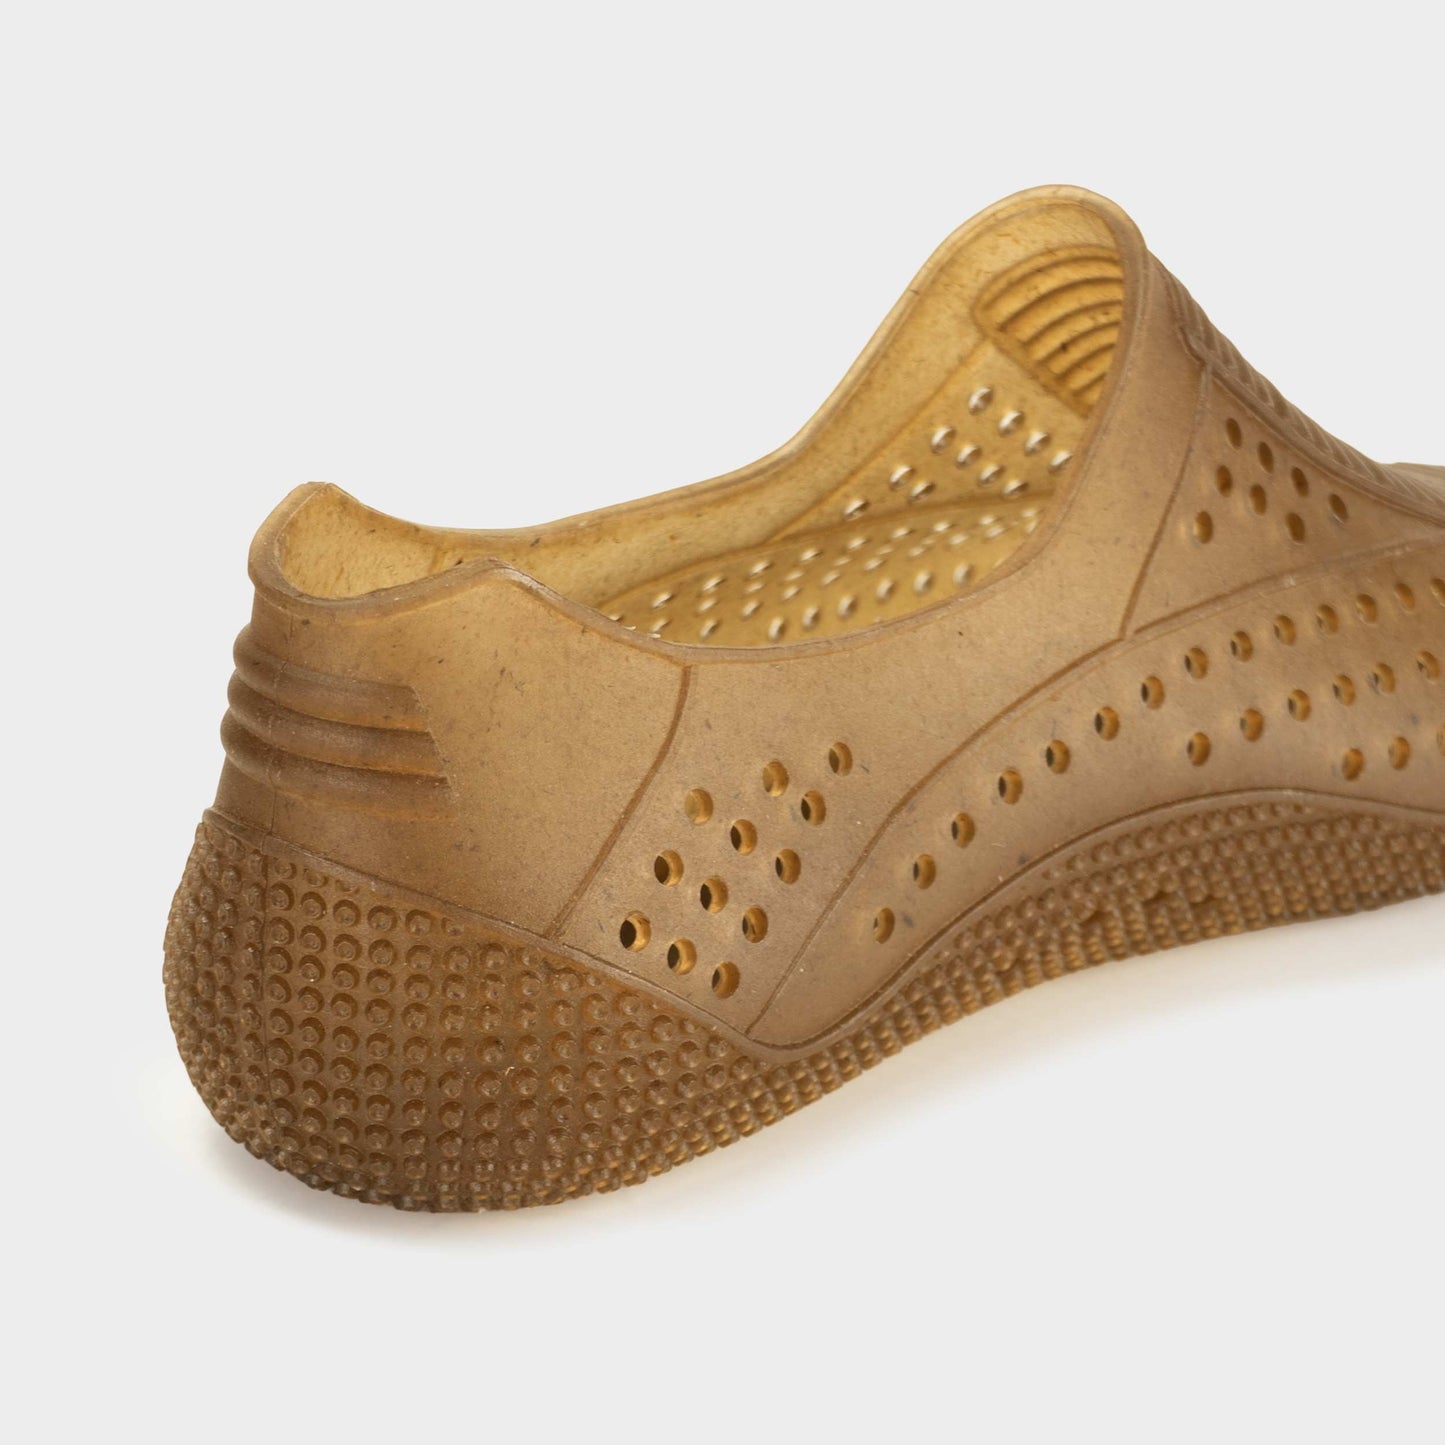 French Recycled Hemp Water Shoe in Sepia